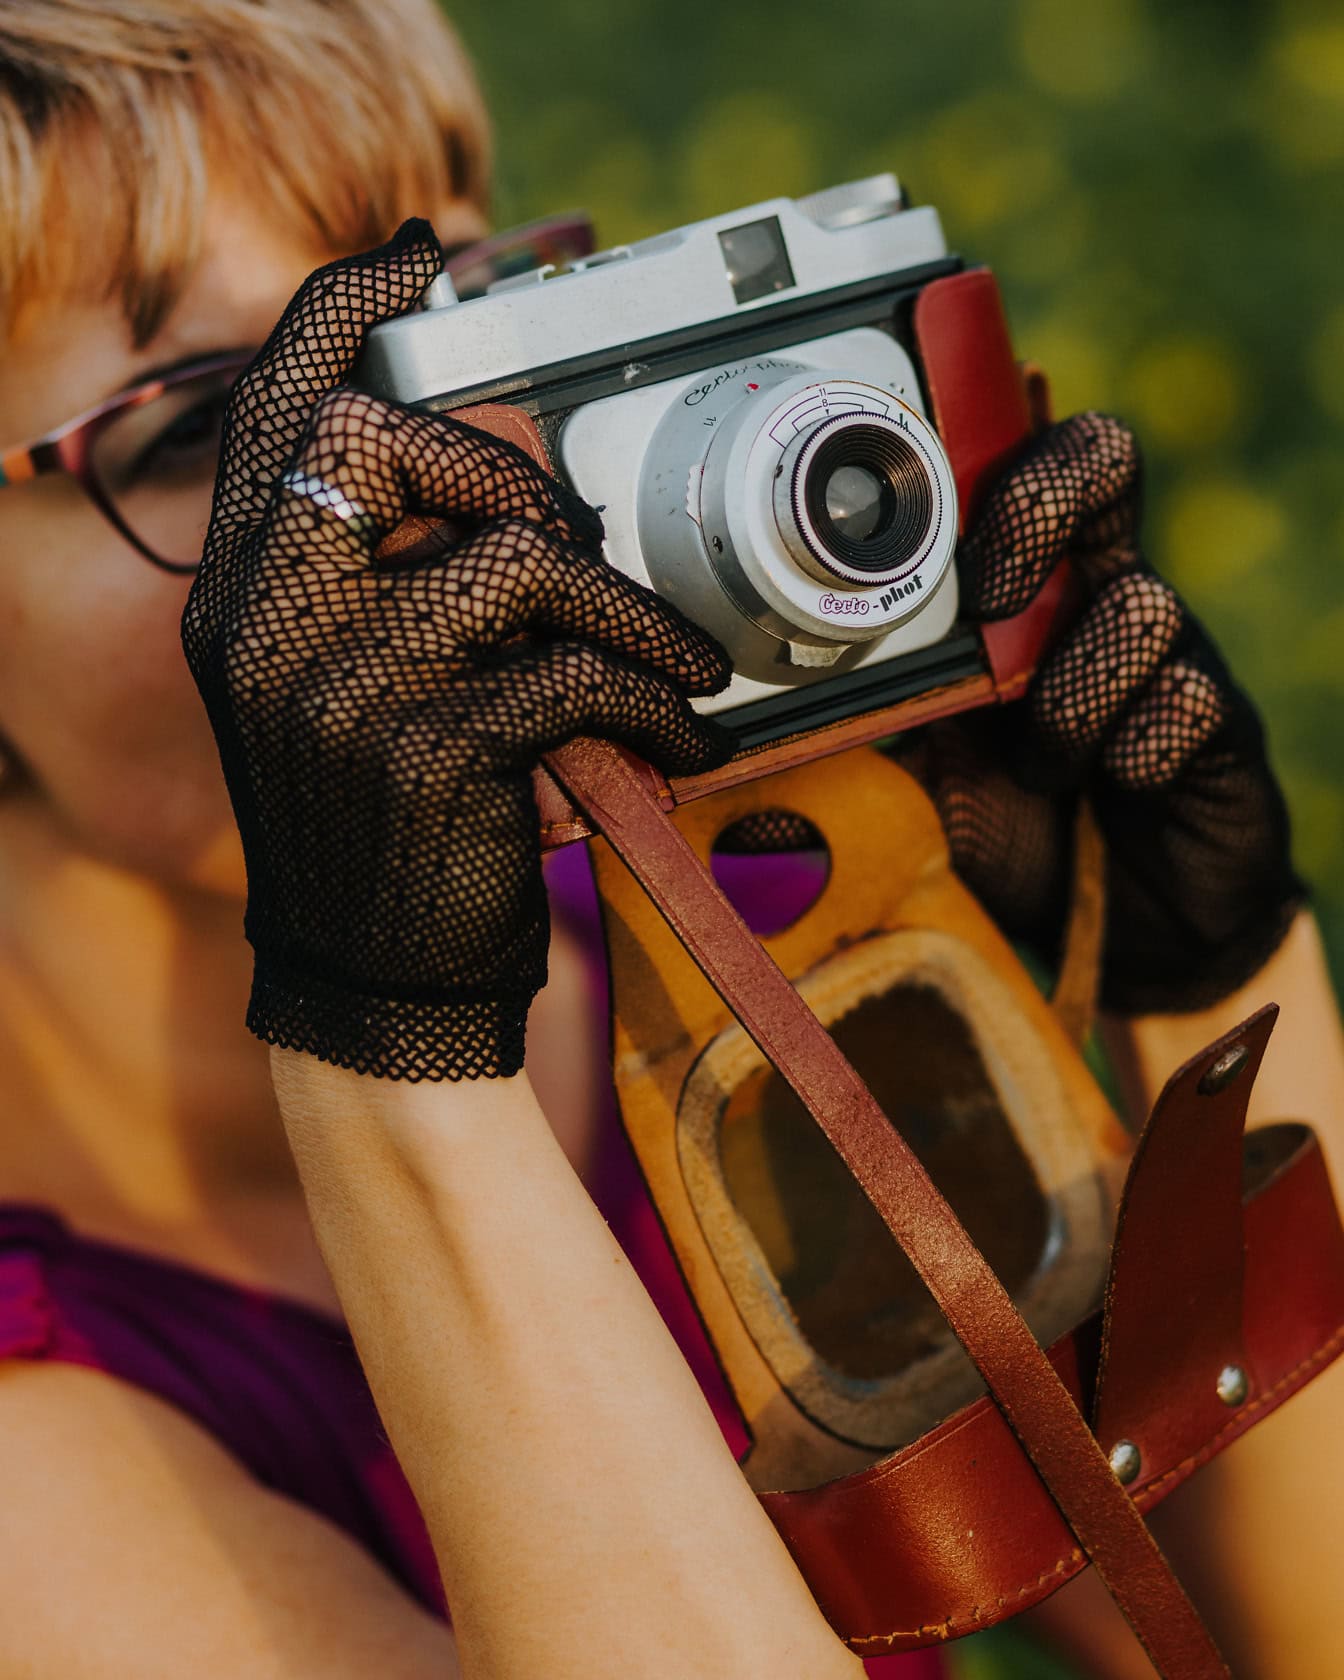 A lady in elegant lace gloves holds an old analog camera